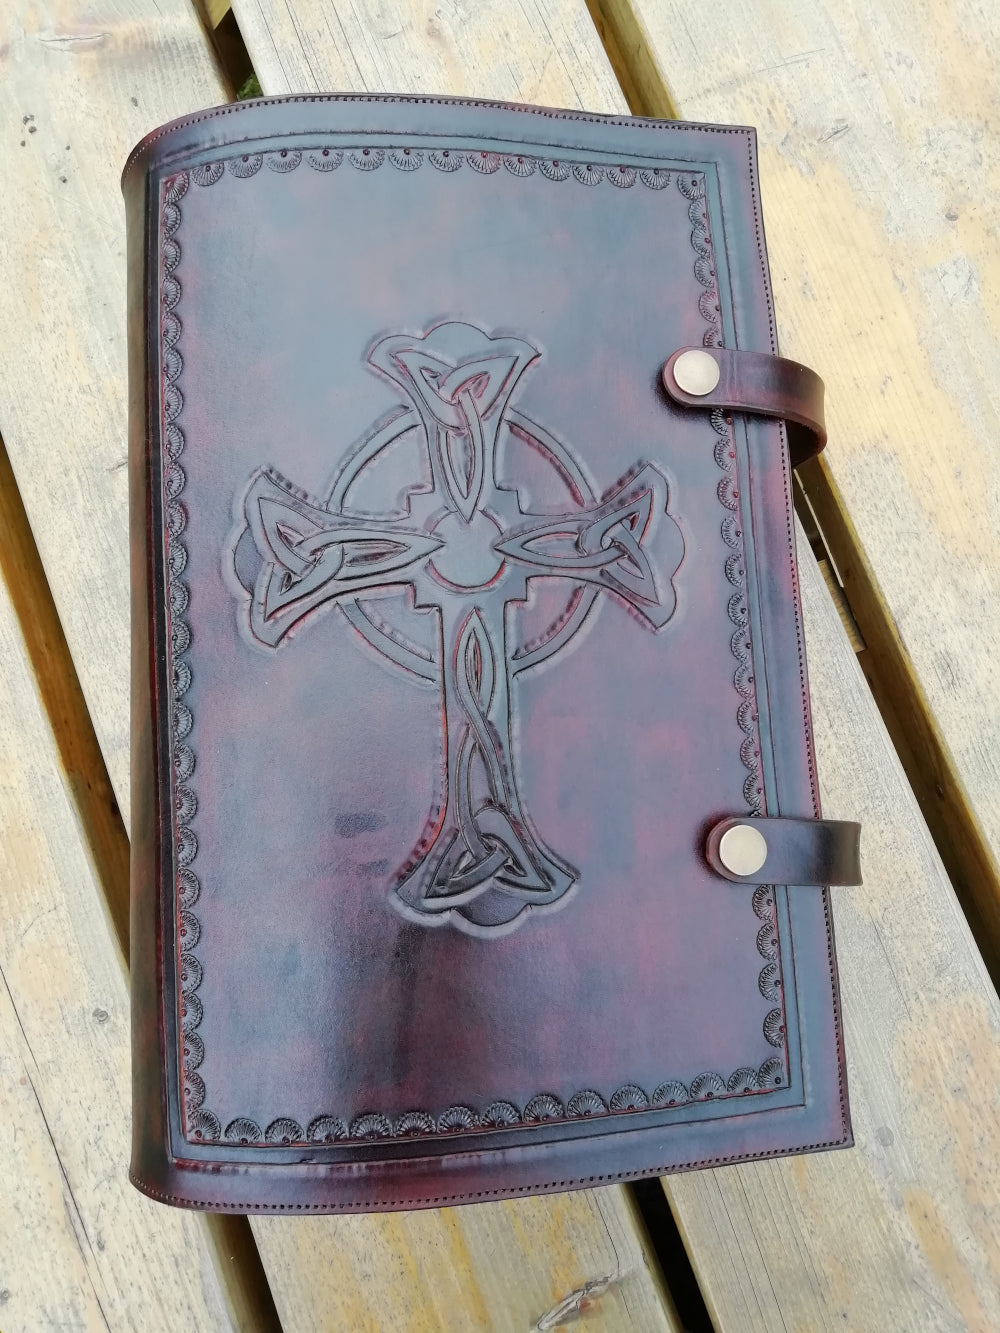 Embossed leather cover